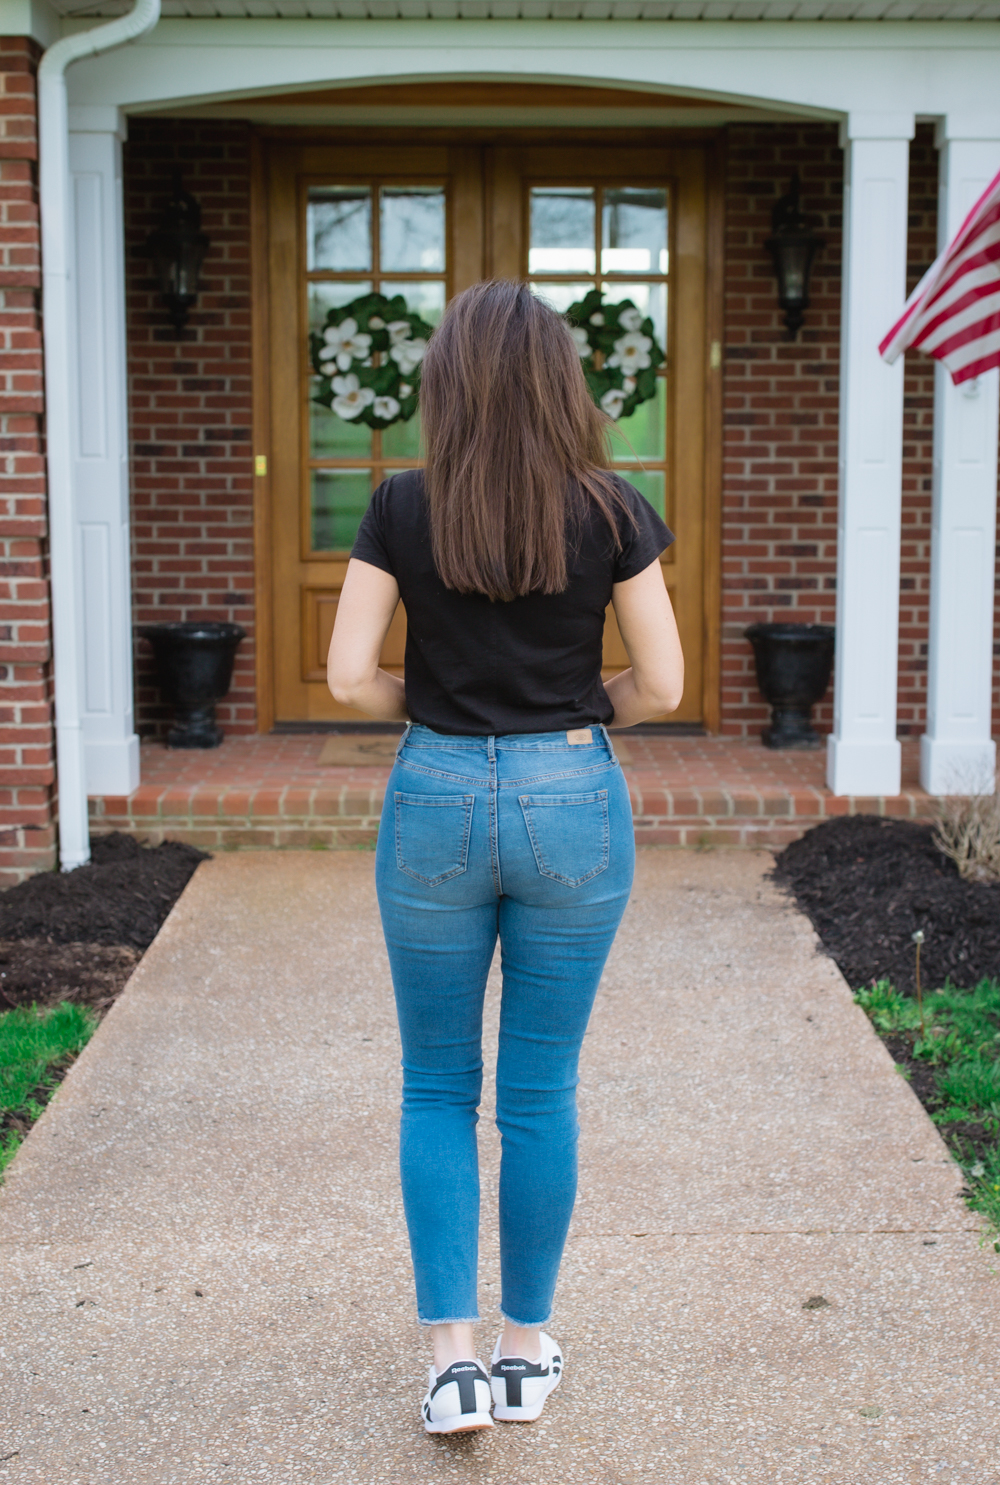 5 Brands of Jeans and How They Look Front and Back